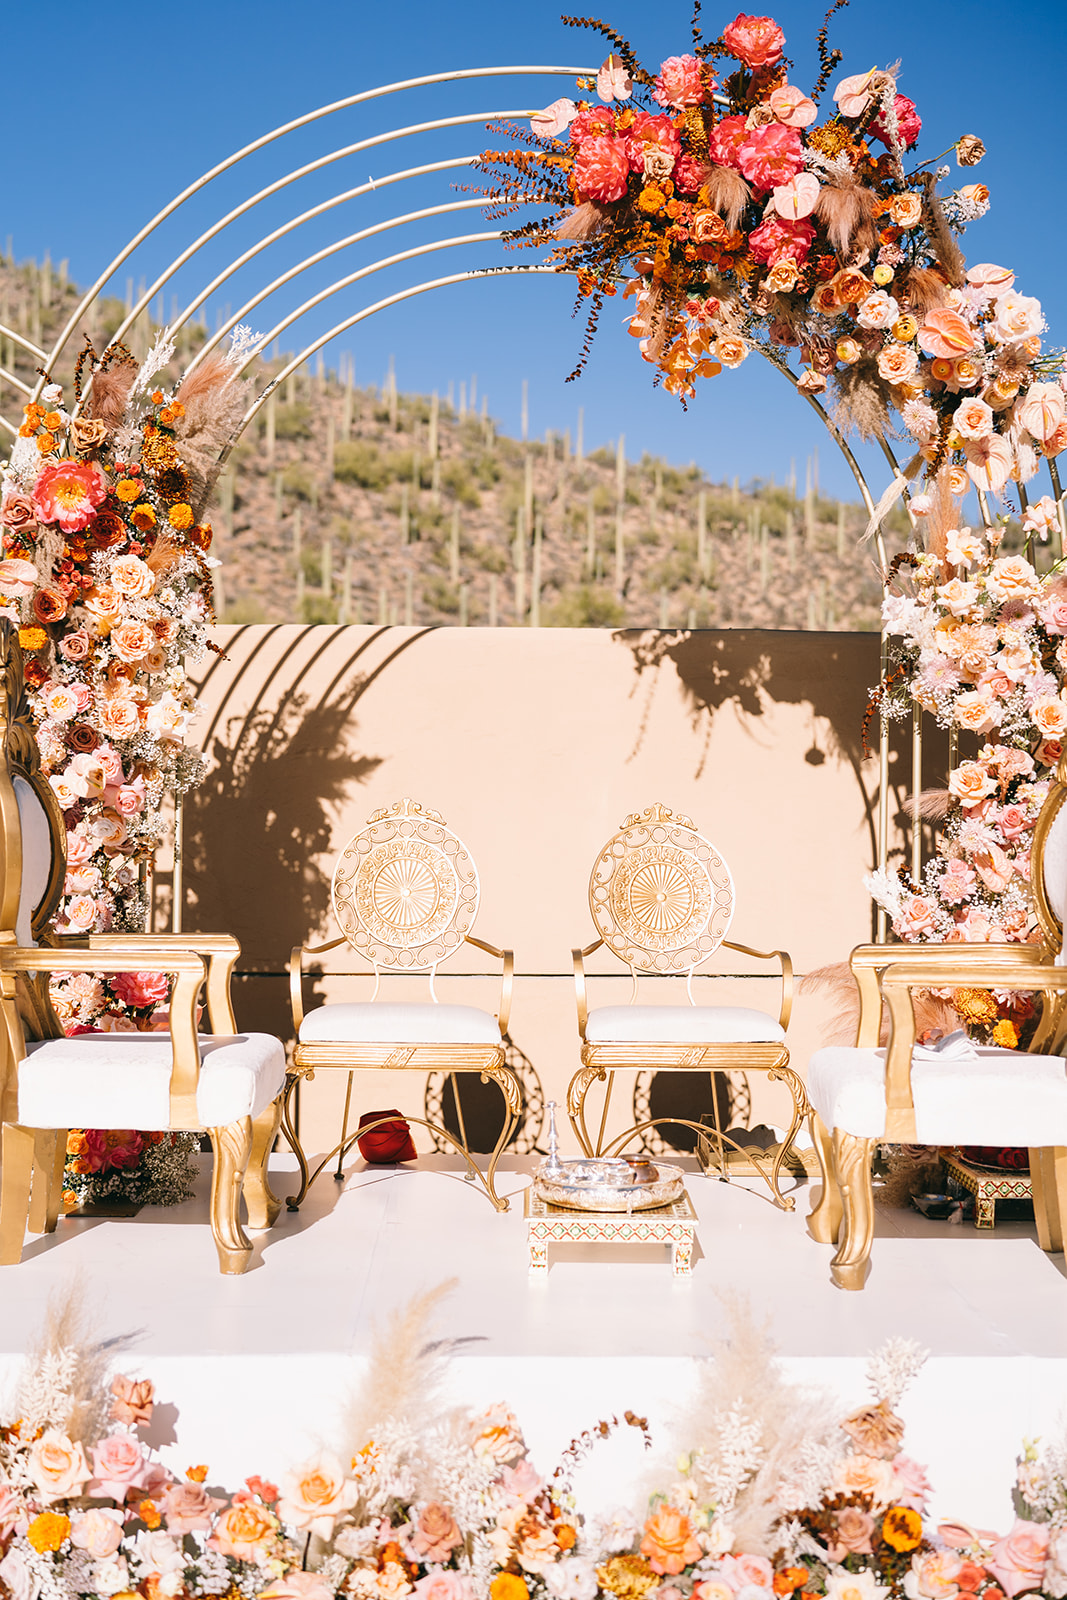 Golden wedding chairs and flower arches in the desert